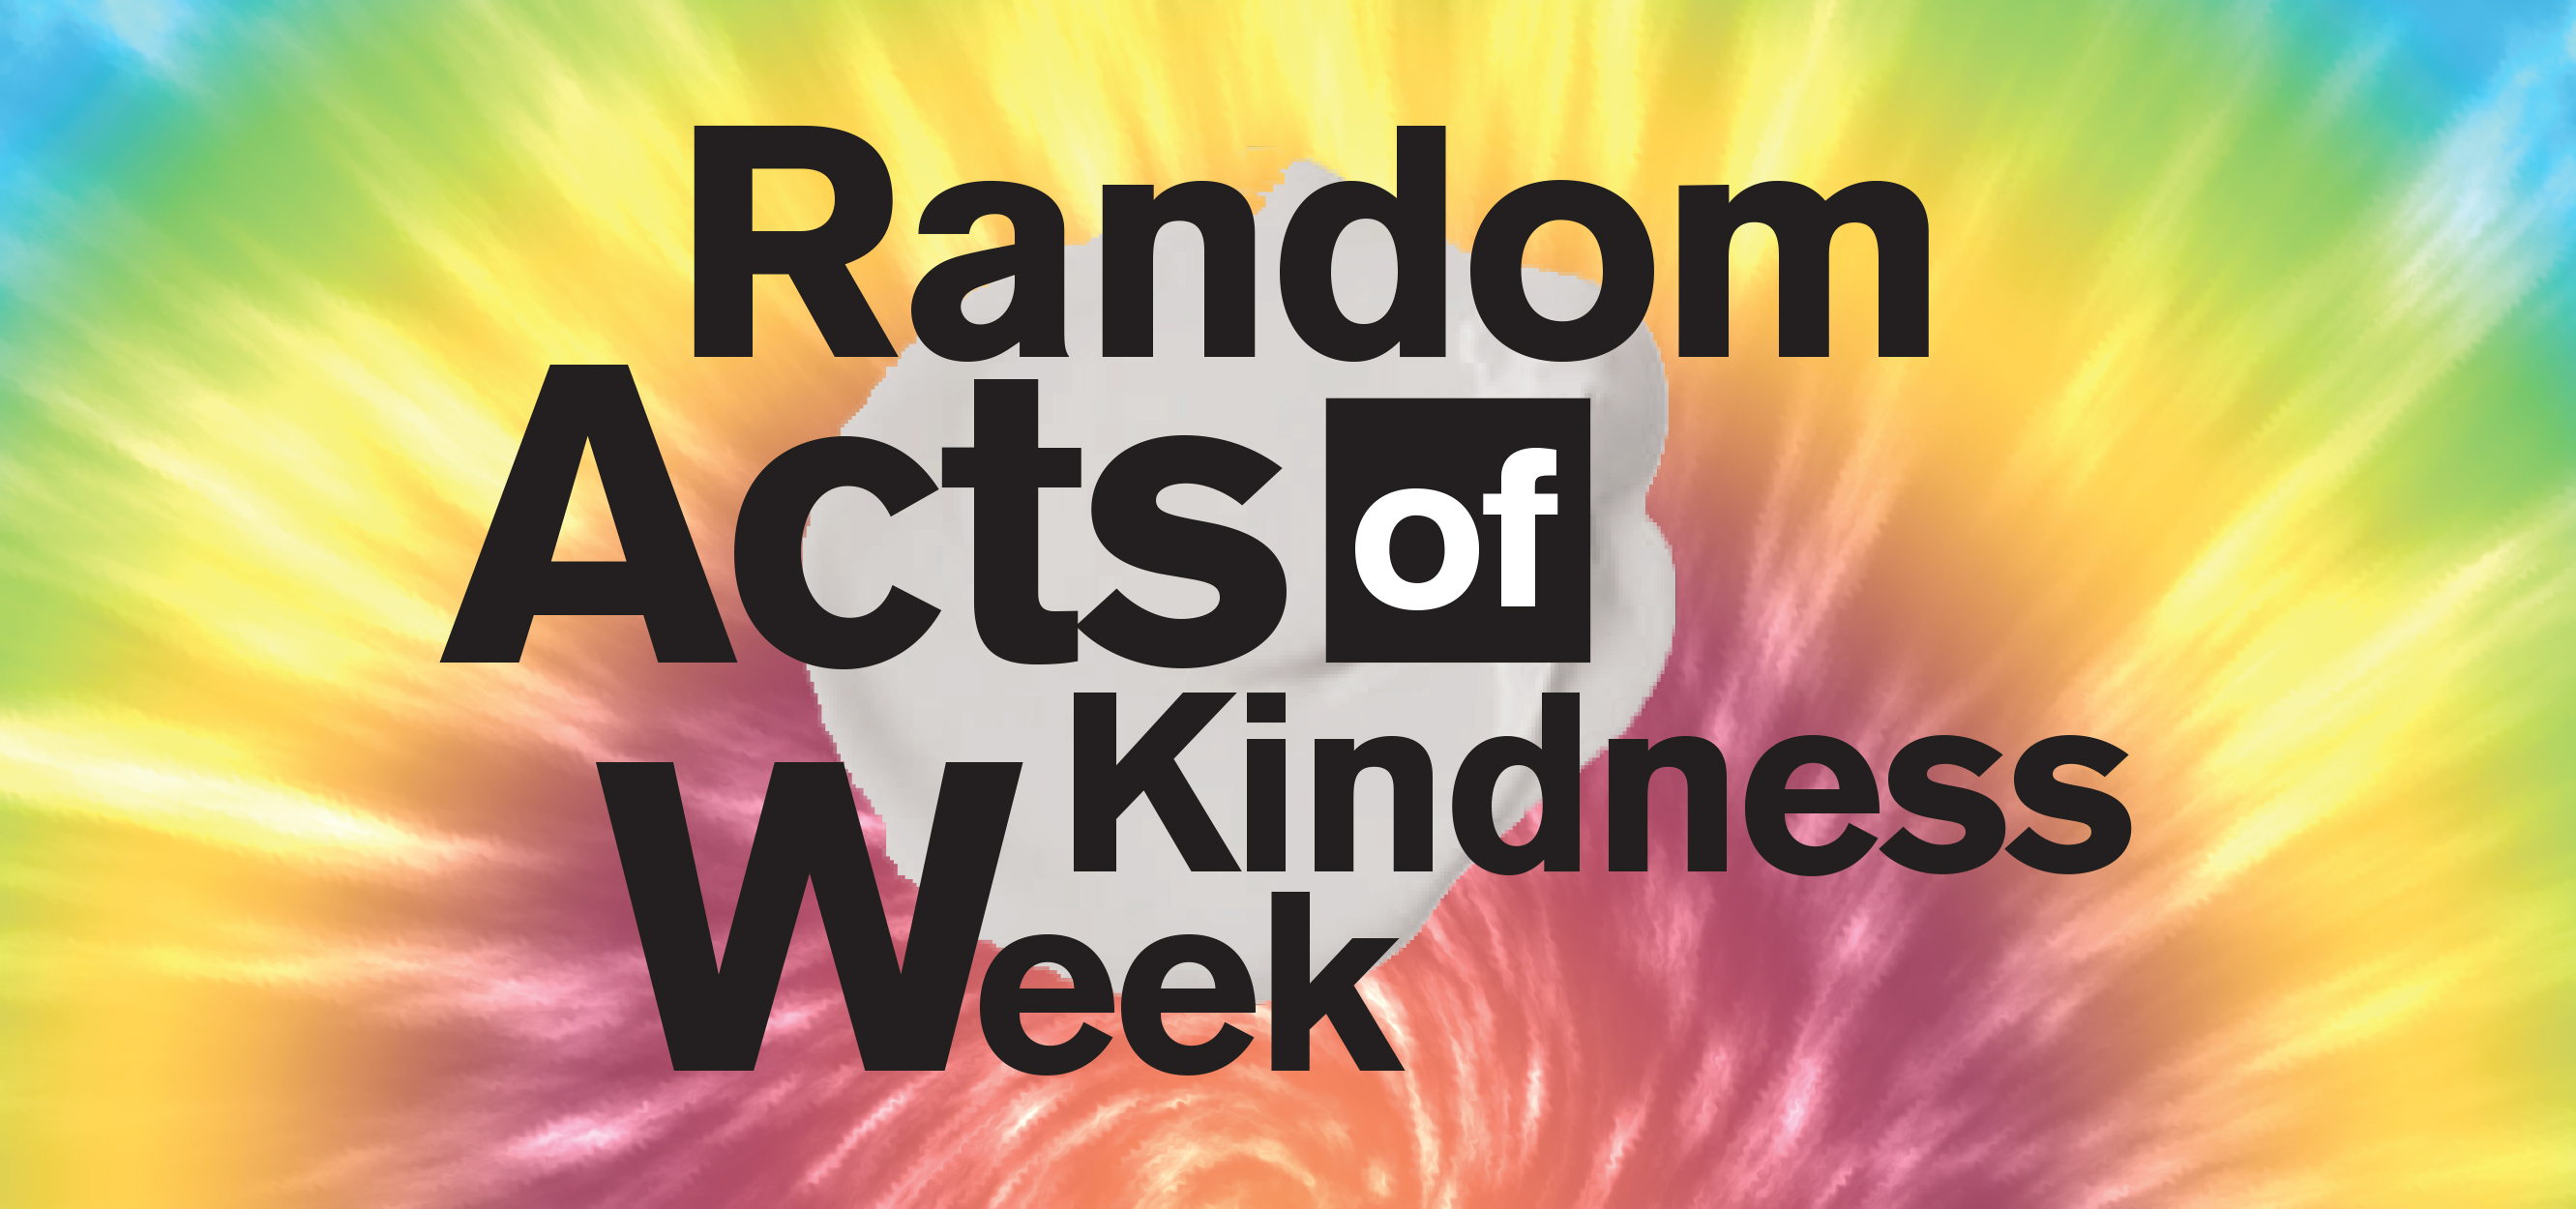 Random Acts of Kindness Week 